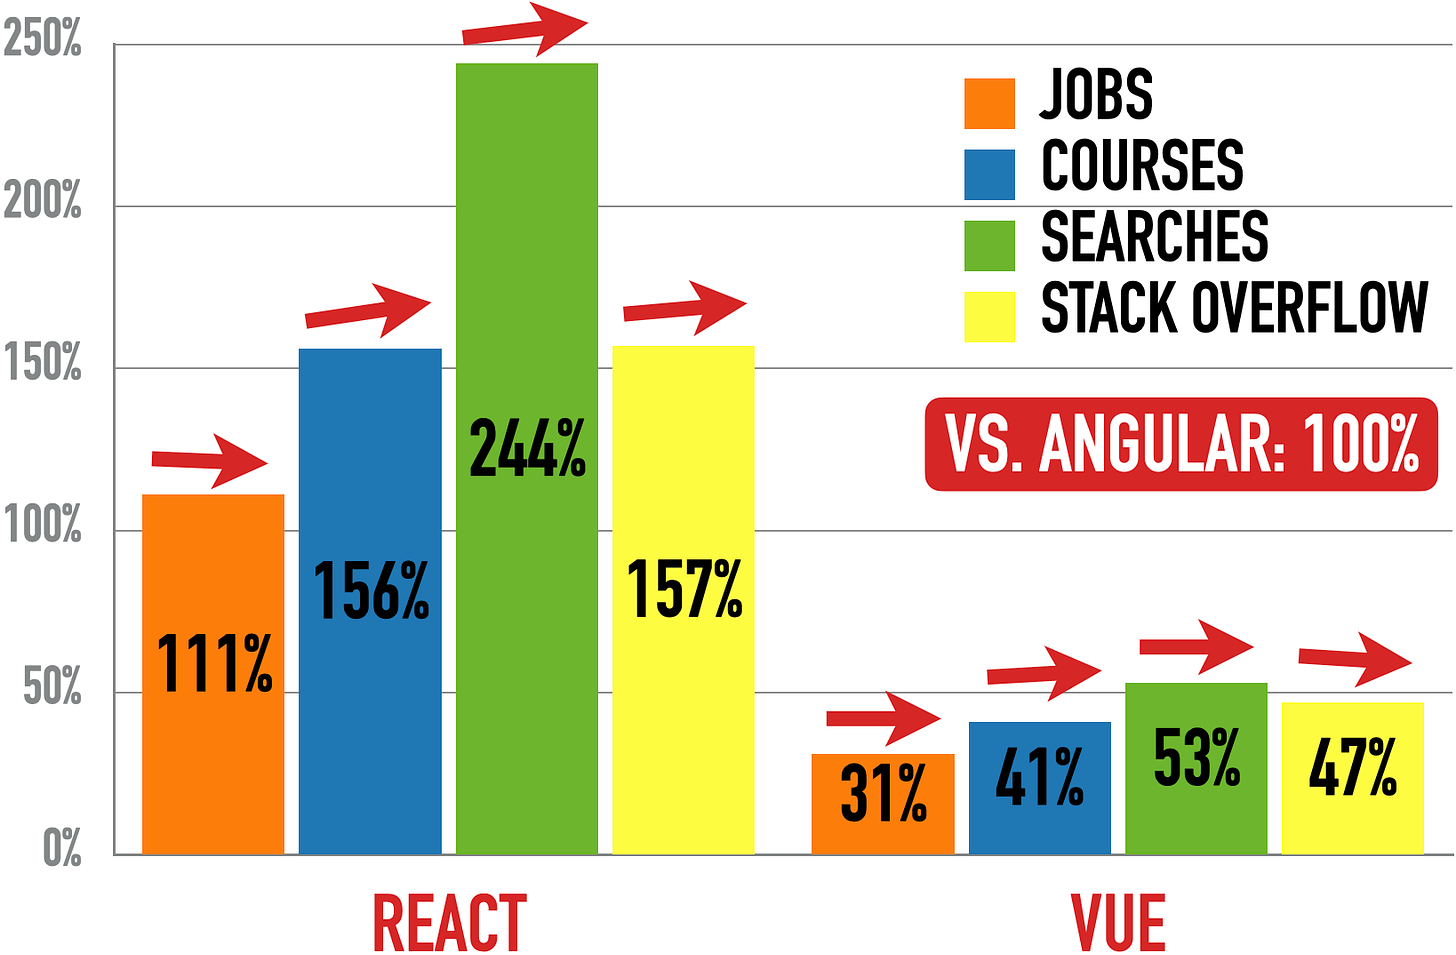 React (left) And Vue (right) vs. Angular (100%)